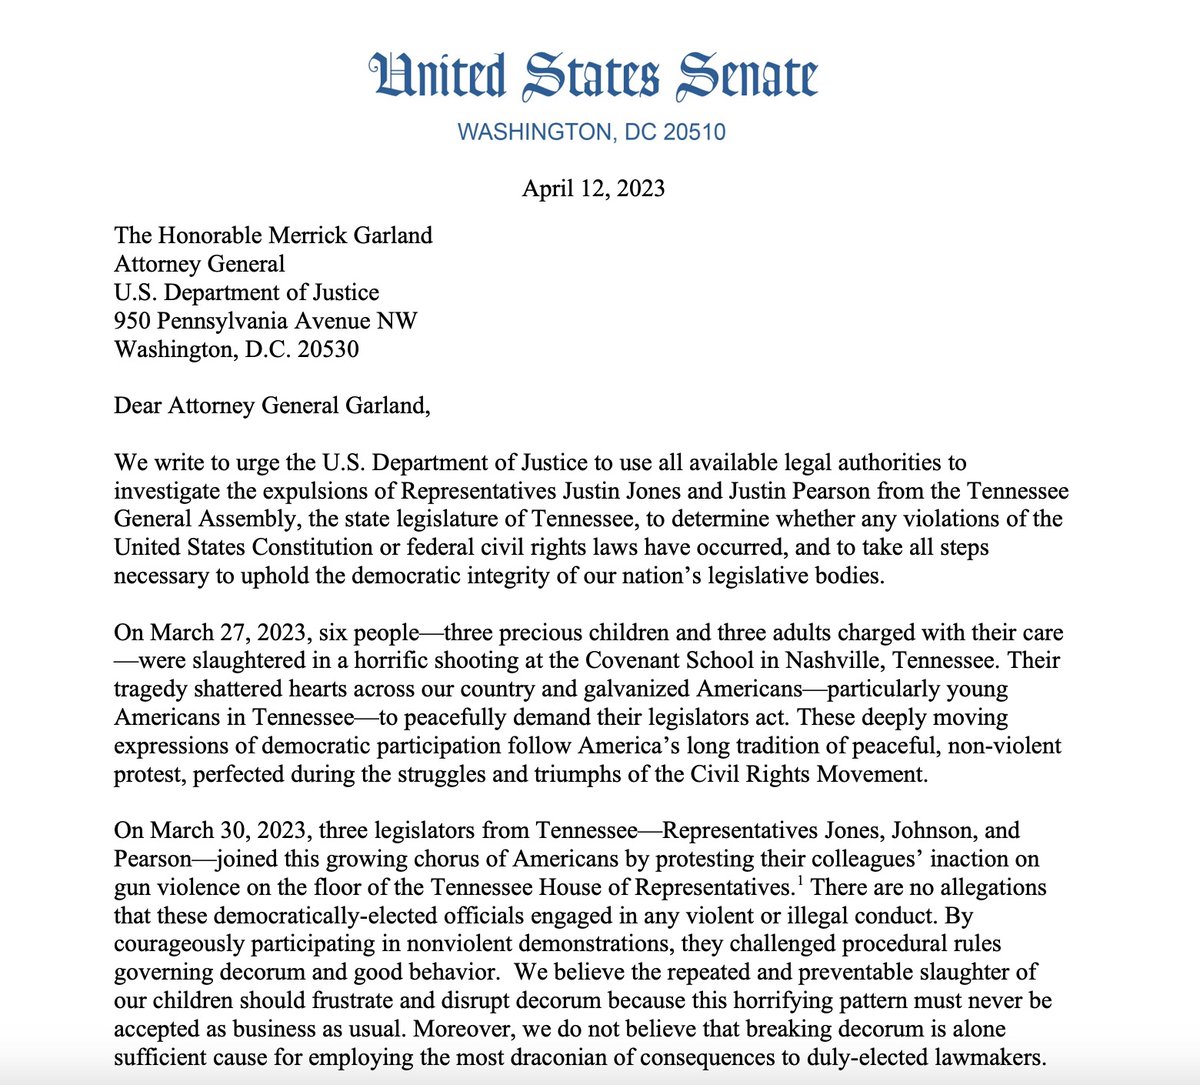 Breaking: Senators Schumer, Warnock, and other Democrats are now calling on the Department of Justice to investigate Tennessee Republicans for constitutional and civil rights violations for expelling Justin Jones and Justin Pearson. (@democracydocket) democracydocket.com/news-alerts/sc…